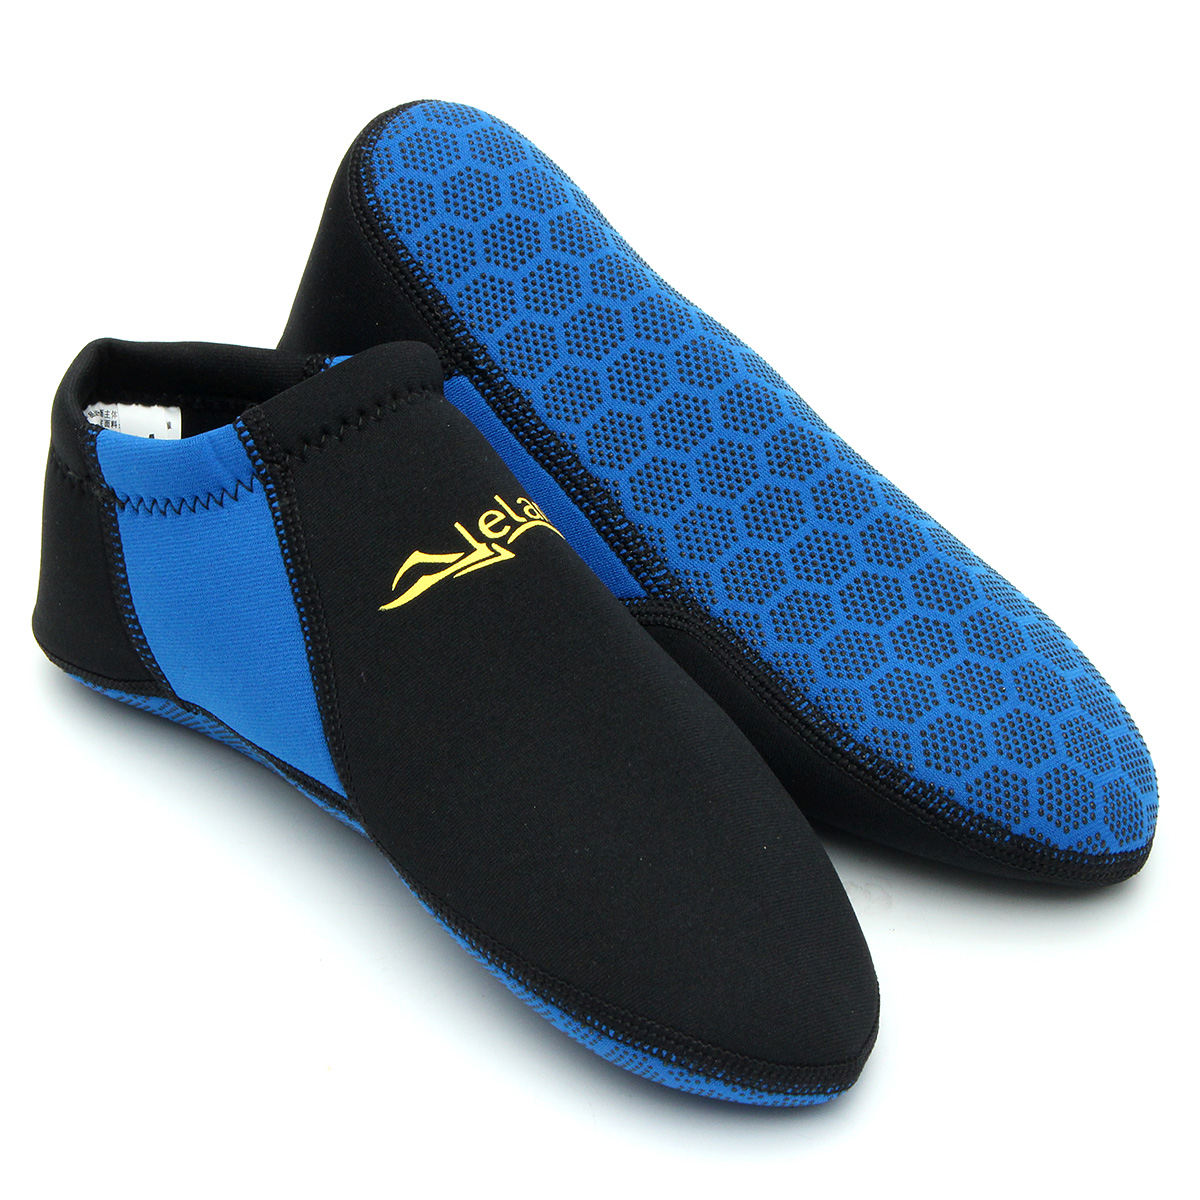 Outdoor-Swimming-Snorkel-Socks-Soft-Beach-Shoes-Water-Sport-Scuba-Surf-Diving-1130872-4